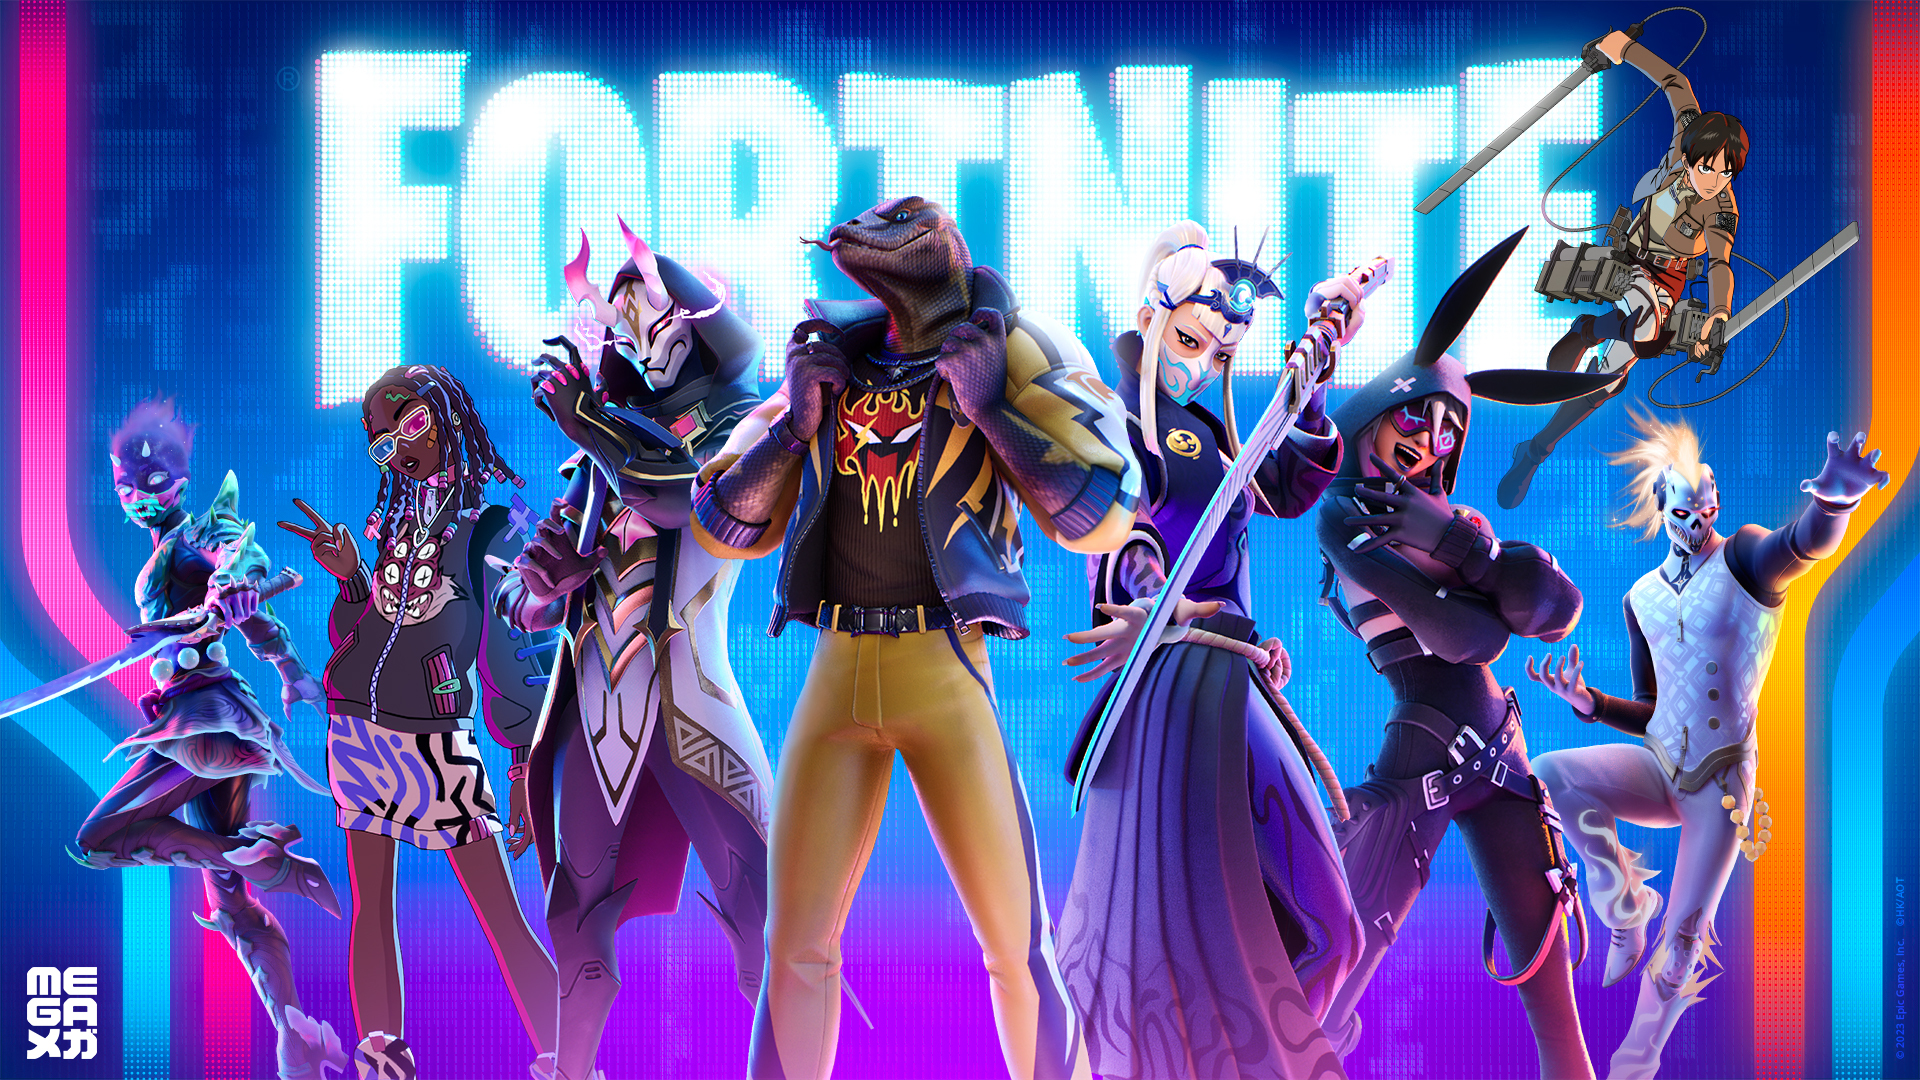 Fortnite launches Chapter 4 of Season 2 with a cyberpunk style